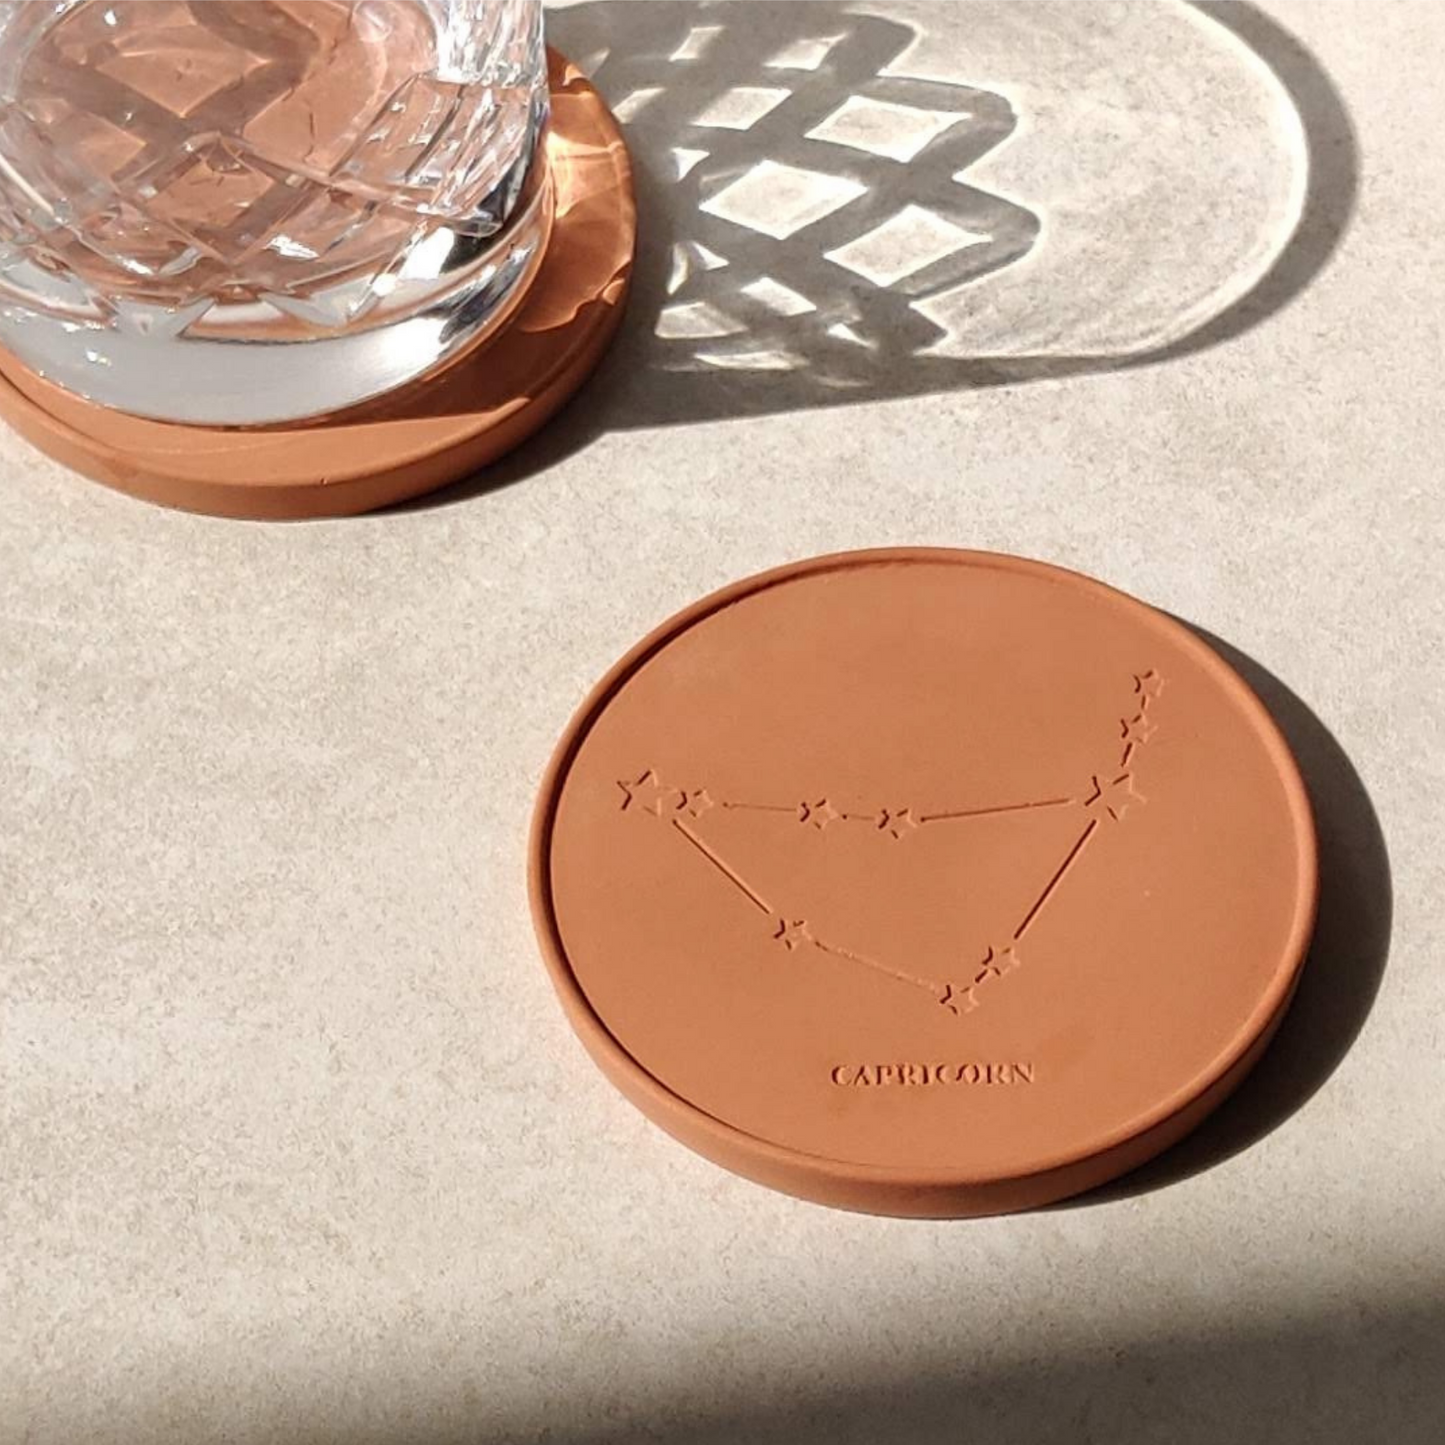 Star Sign Personalised Coasters in Pink Clay